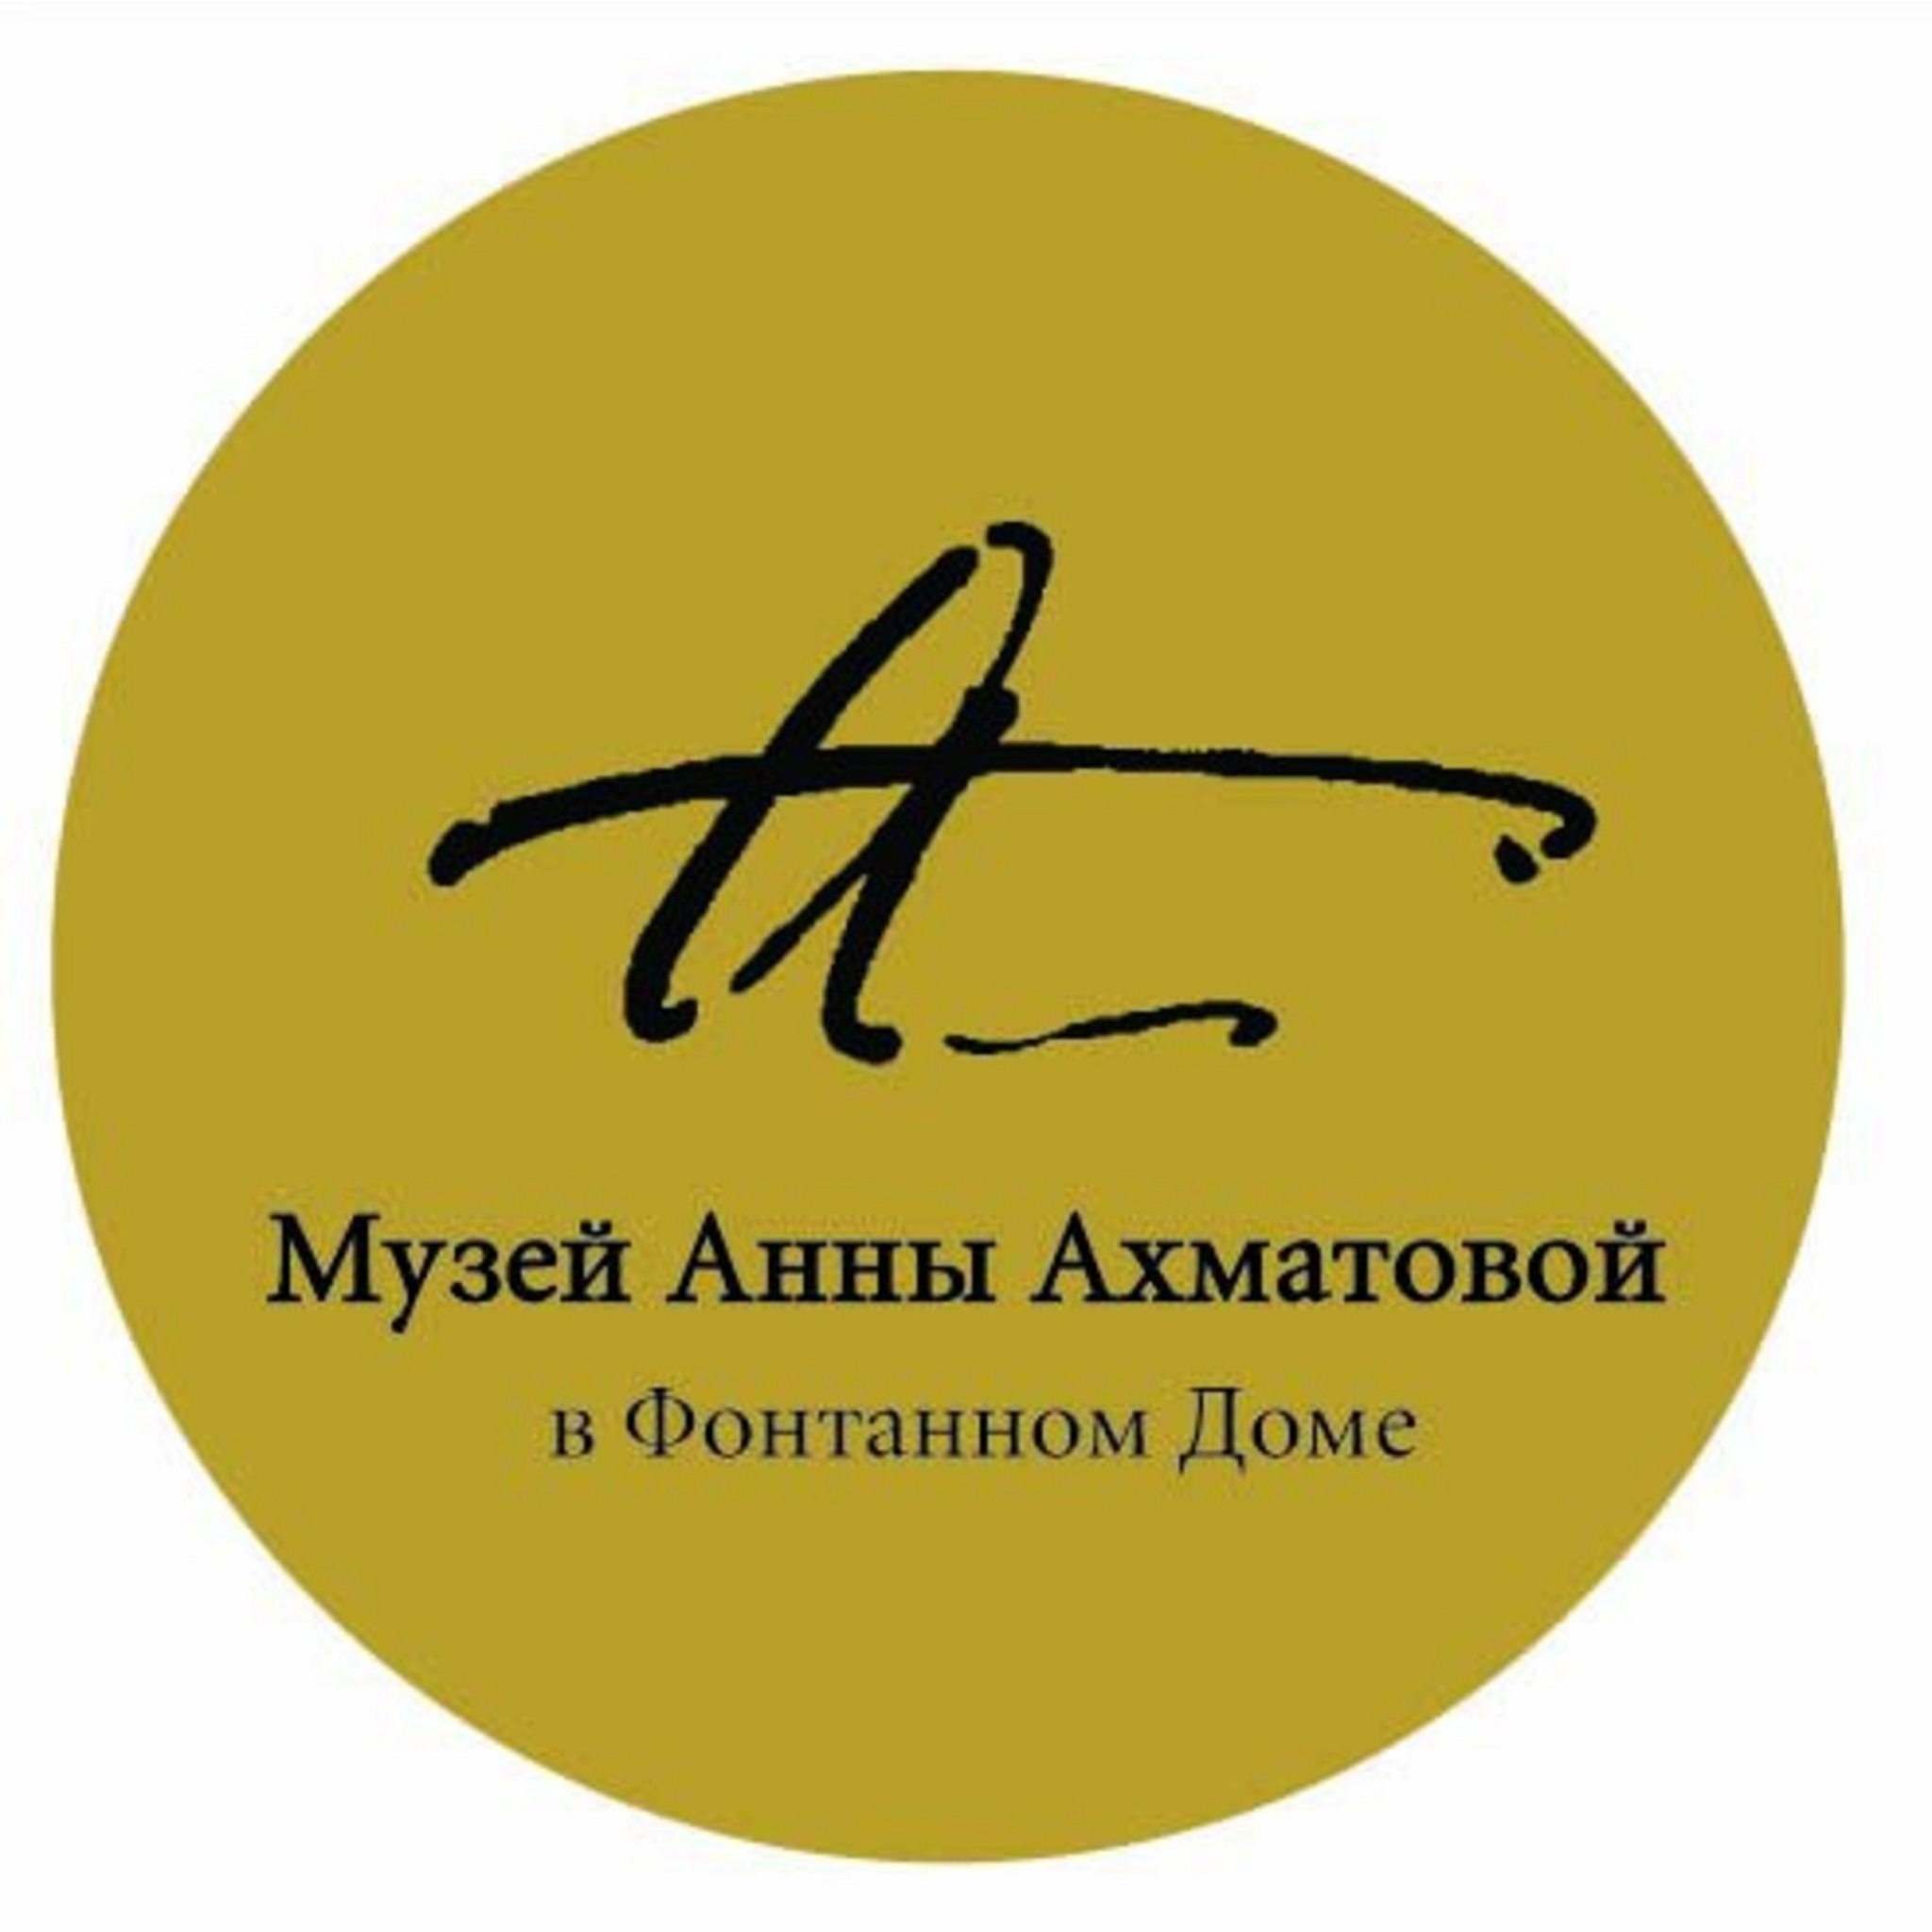 Schedule of events from 16 to 22 January 2017 in the Anna Akhmatova Museum at the Fountain House